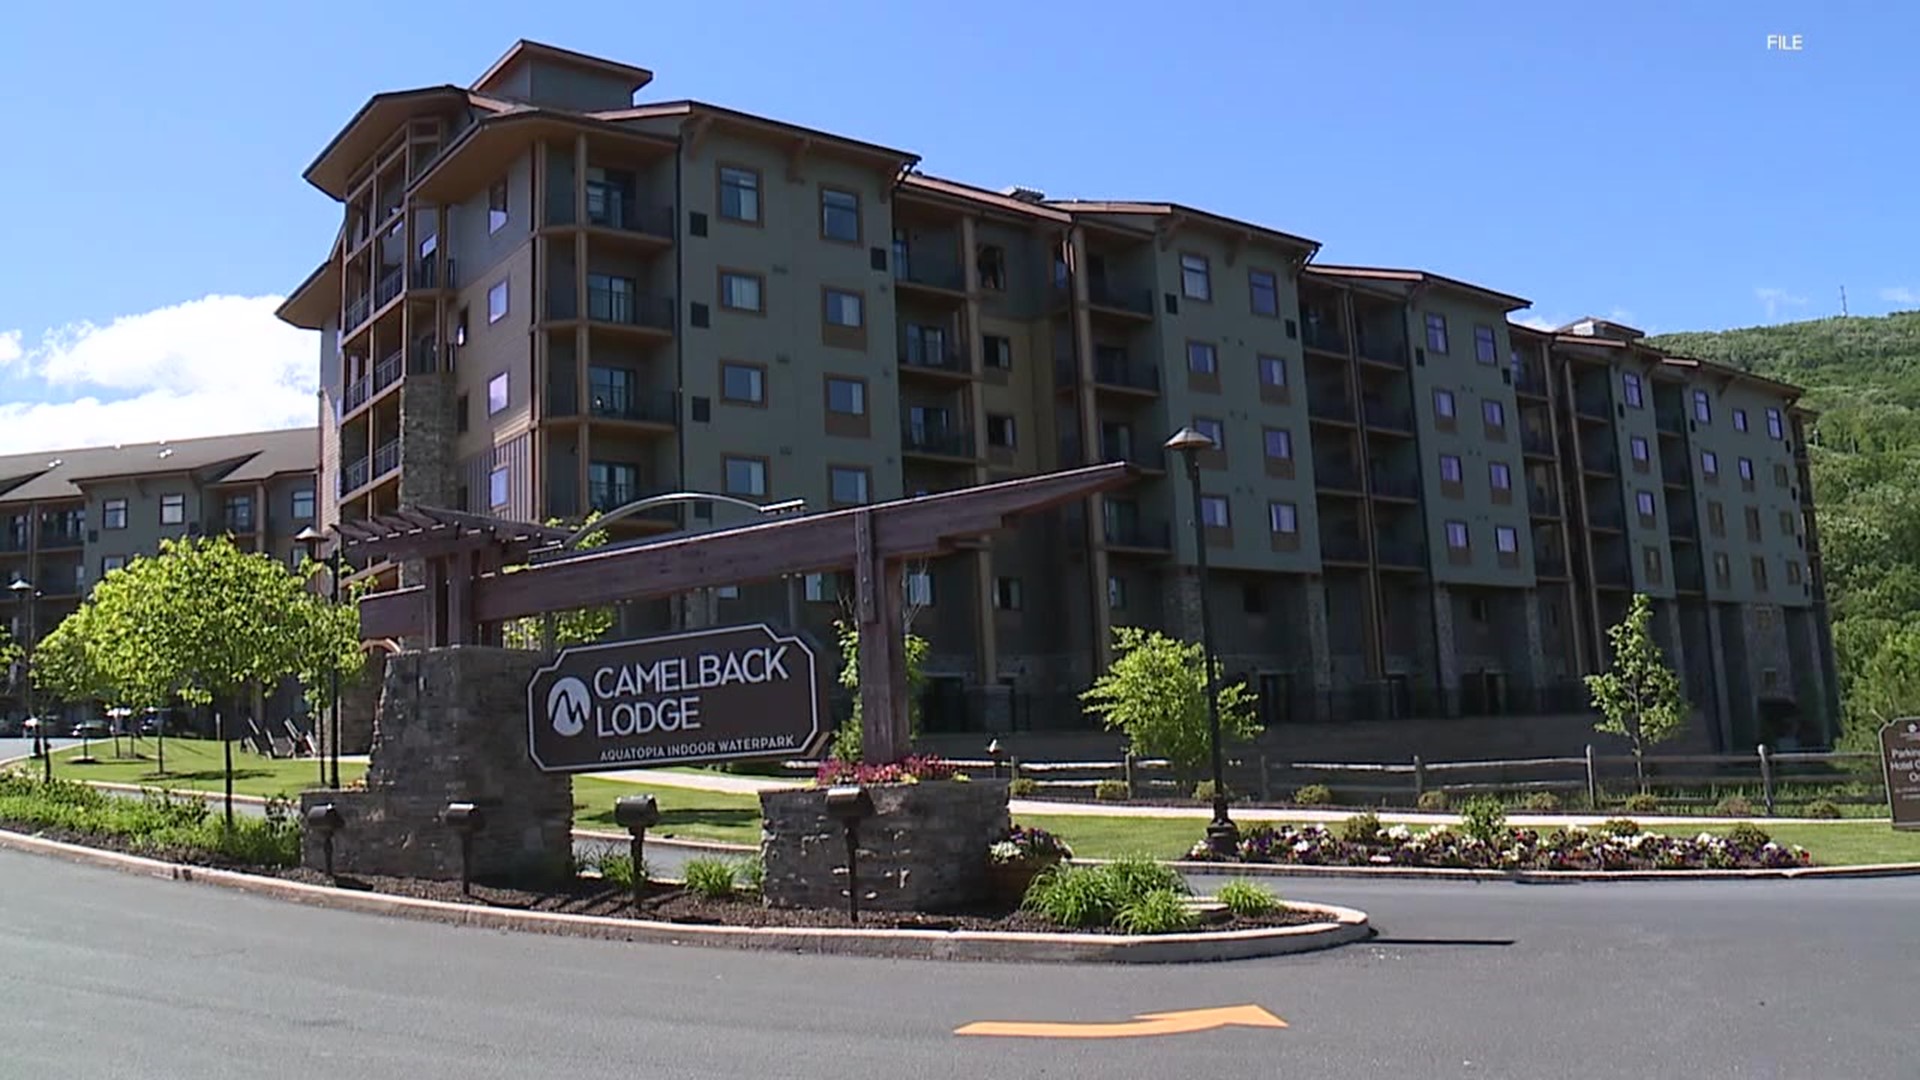 Camelback Mountain Resort is hoping to reopen its doors to visitors in June. Camelbeach will remain closed until further notice.